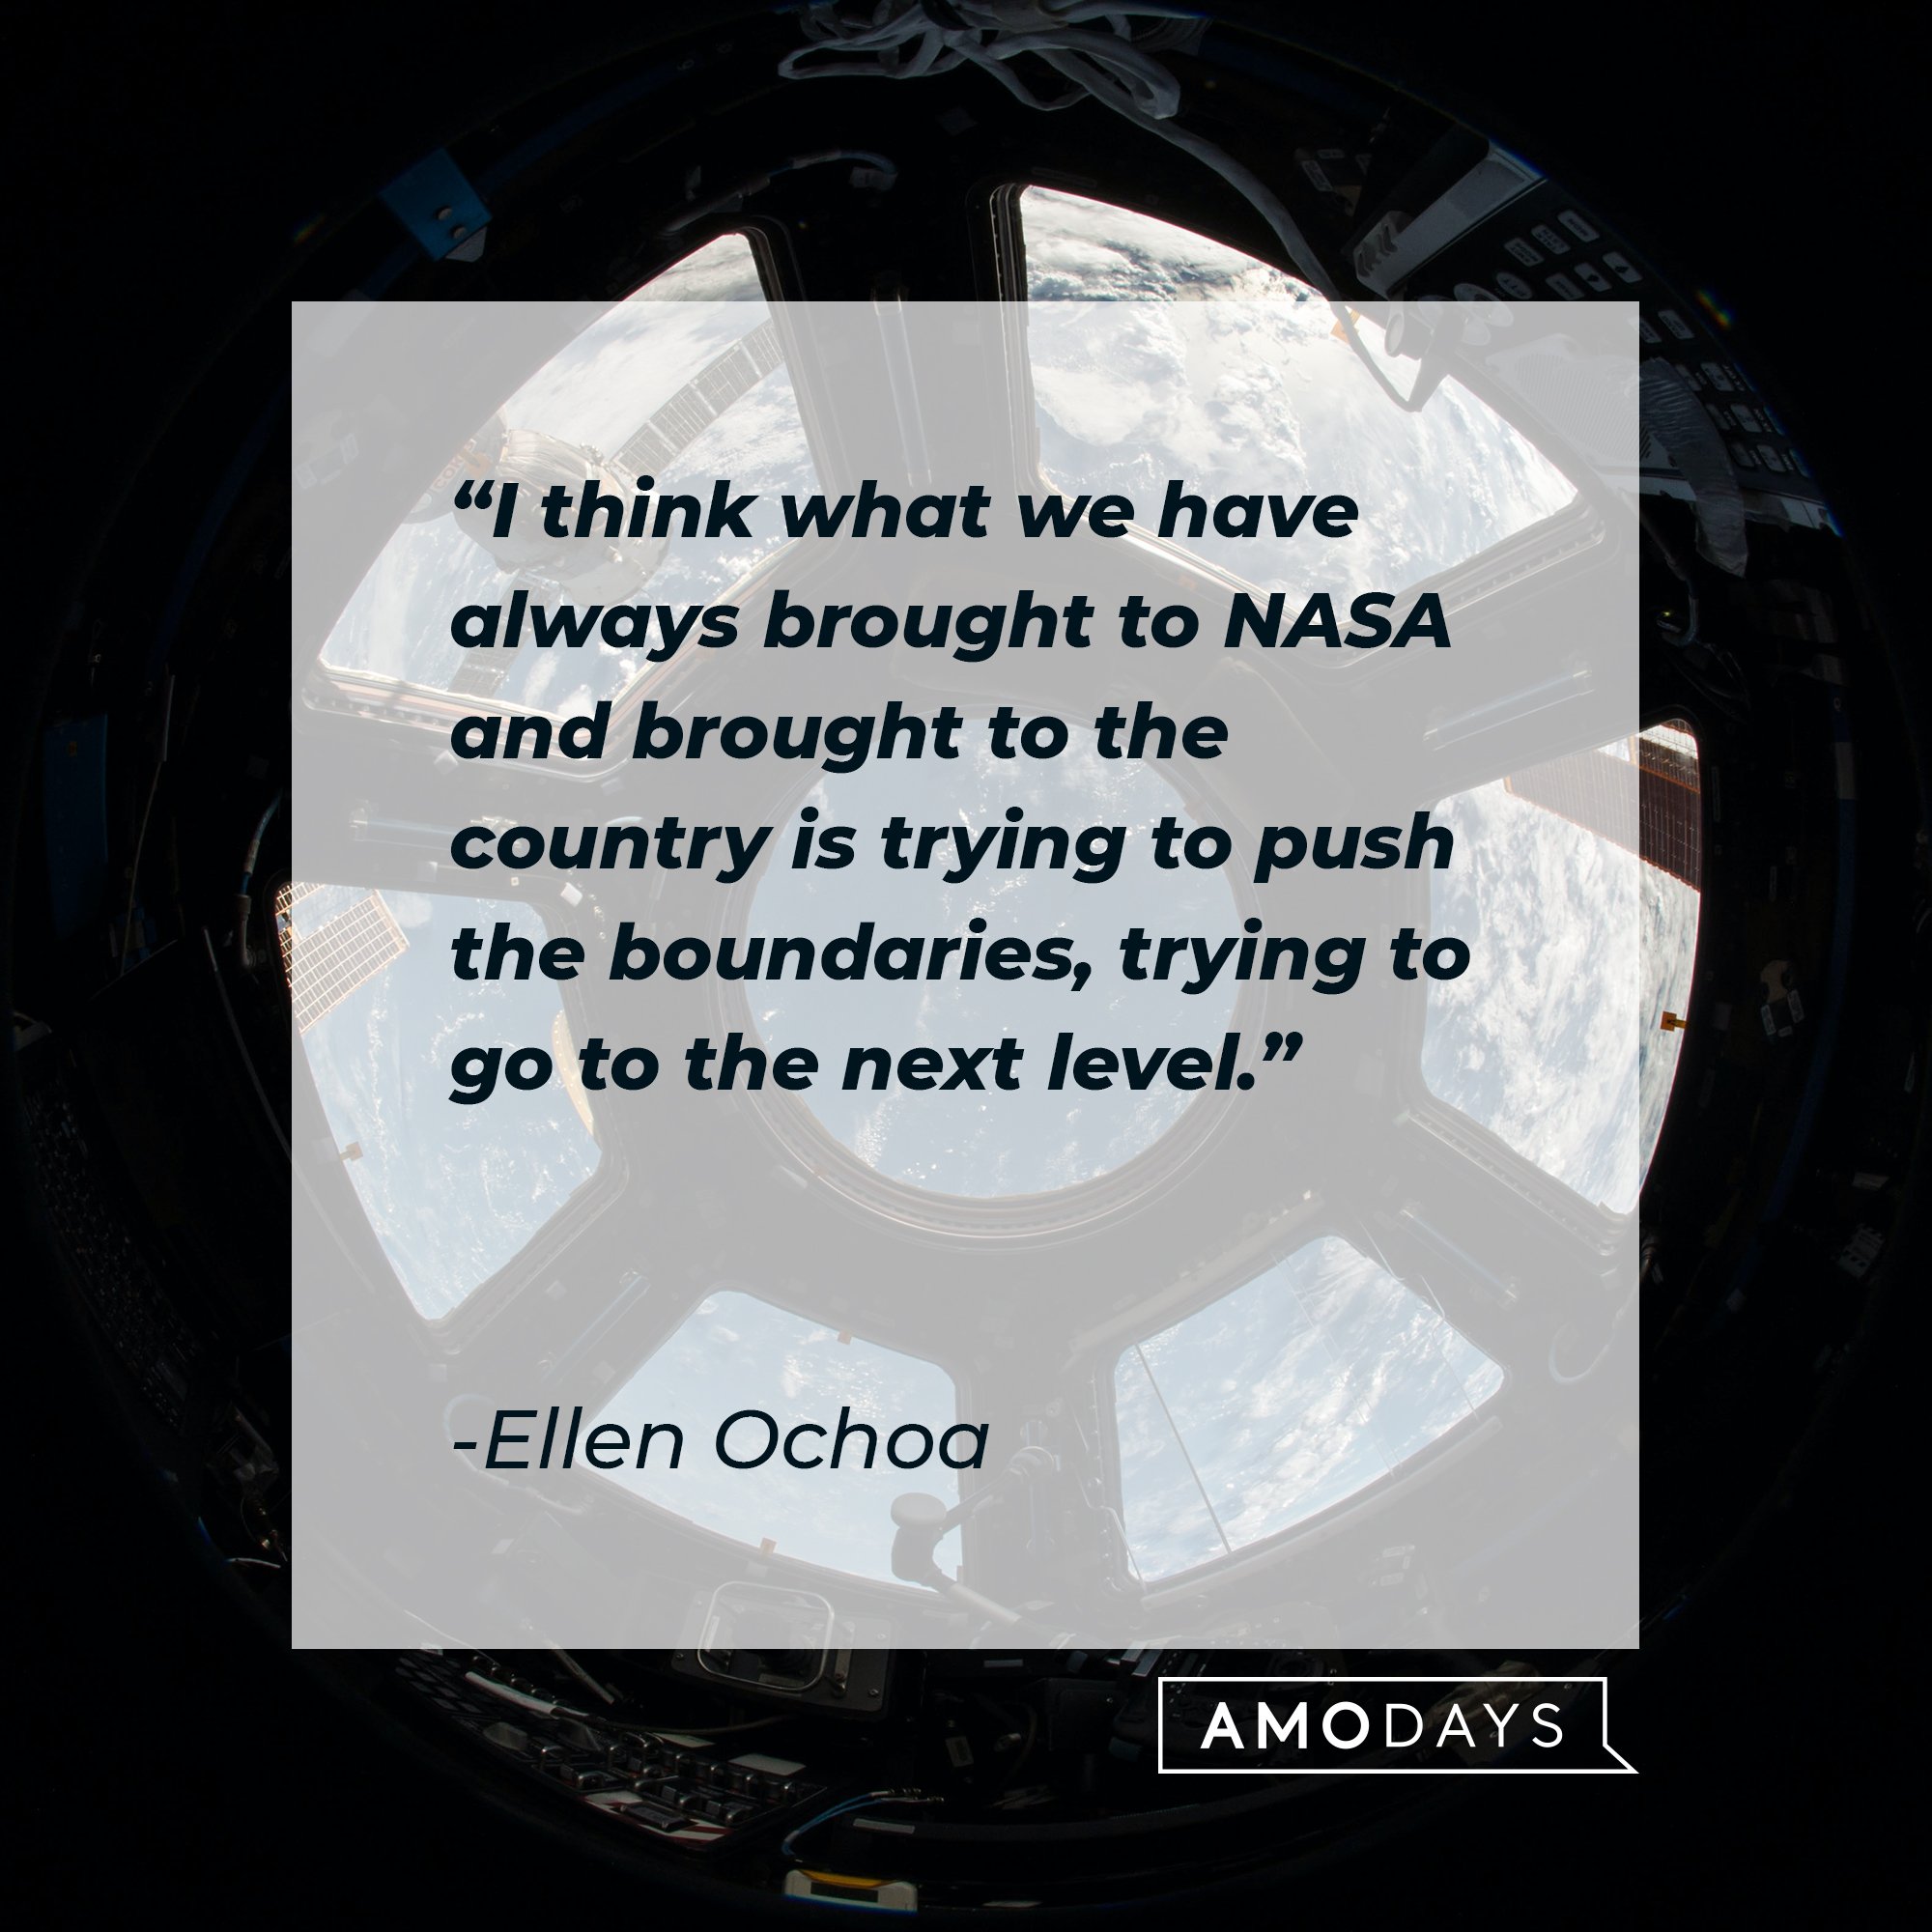  Ellen Ochoa's quote: "I think what we have always brought to NASA and brought to the country is trying to push the boundaries, trying to go to the next level." | Image: AmoDays